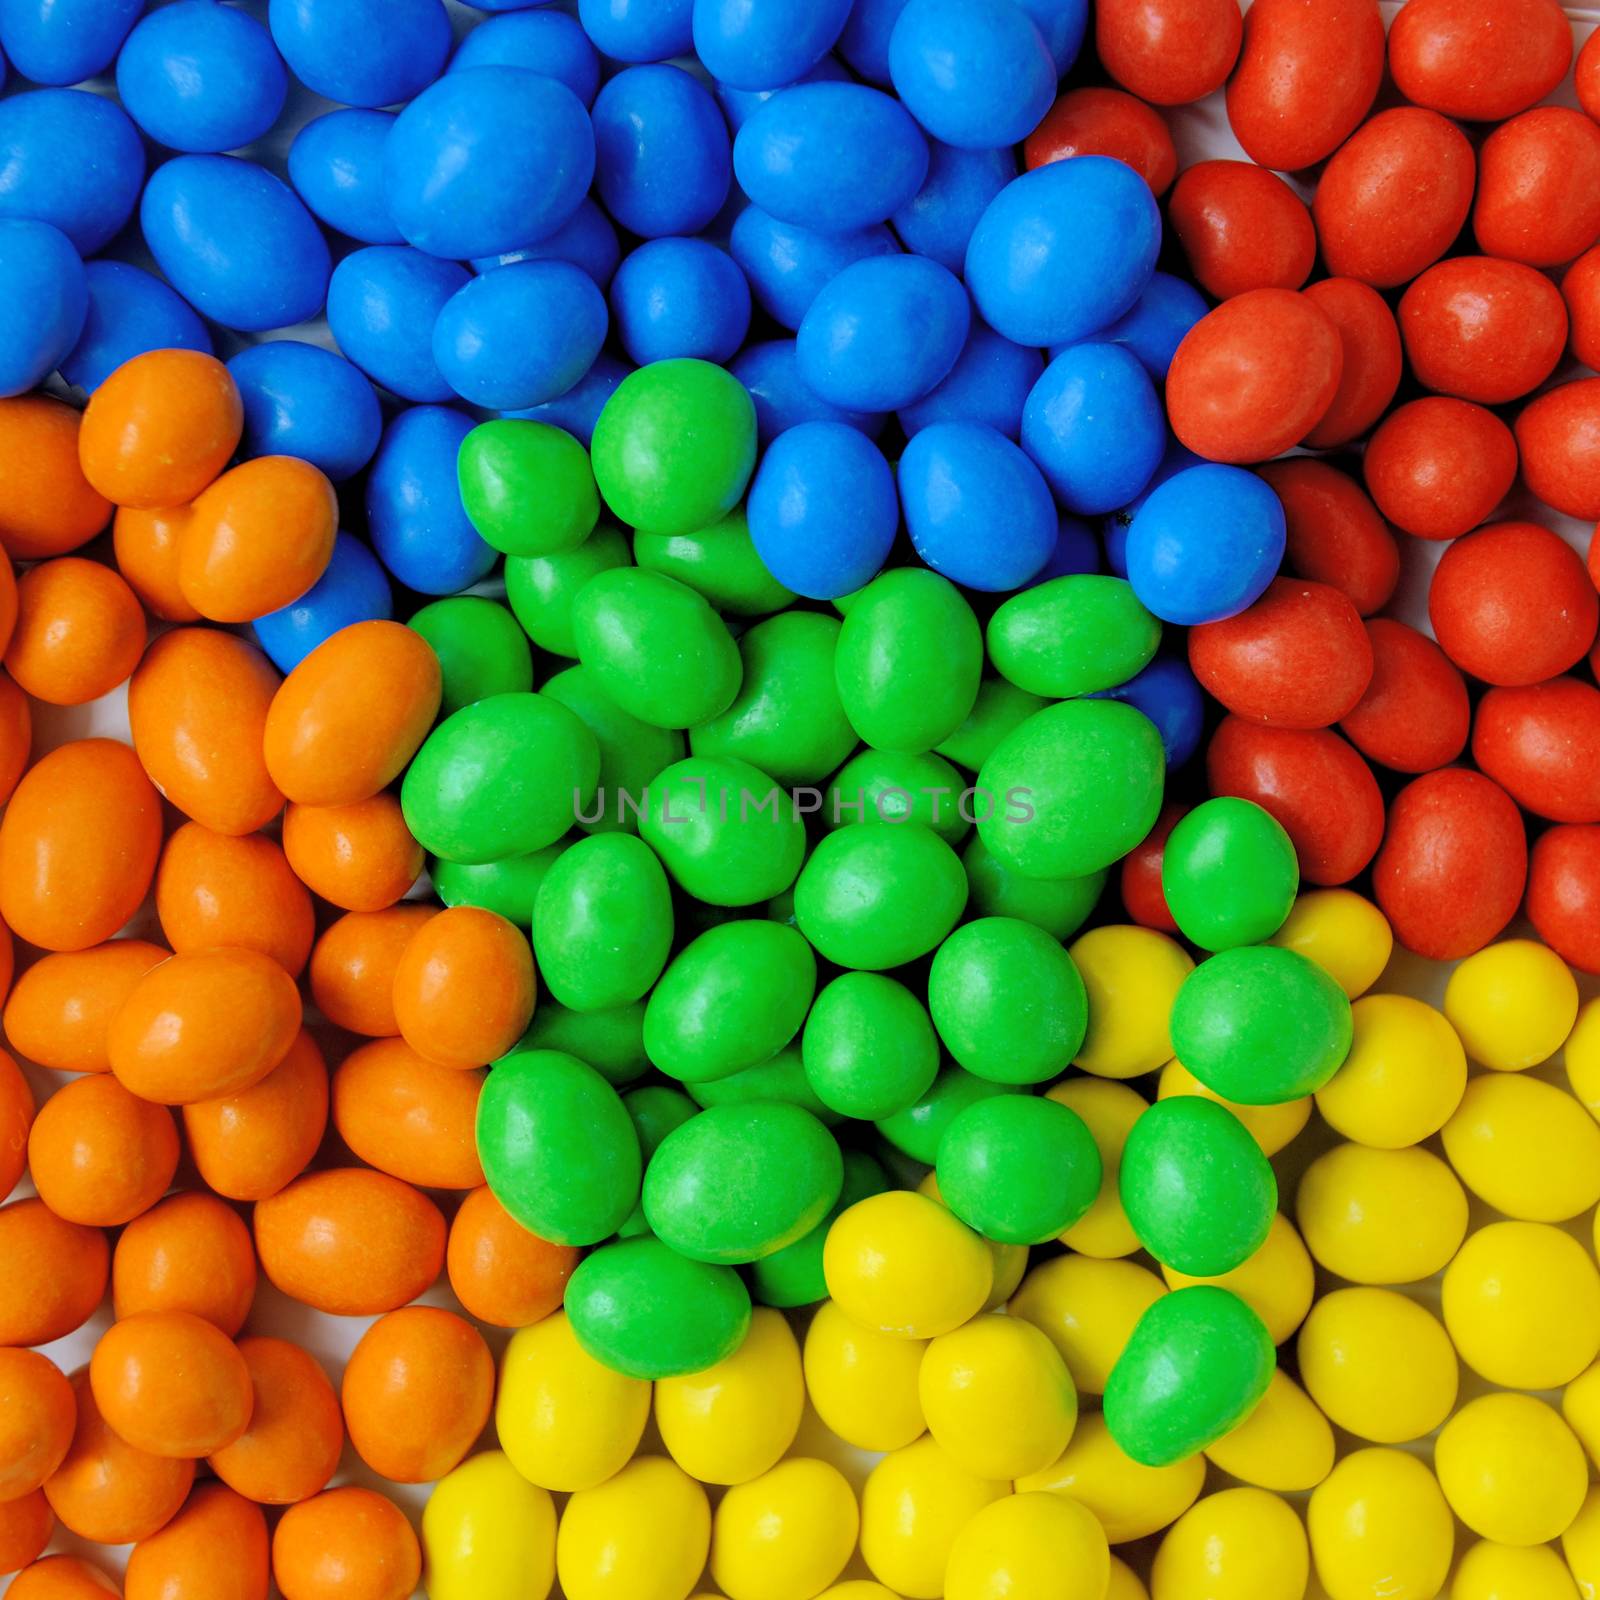 Close-up of a pile of colorful chocolate coated candy